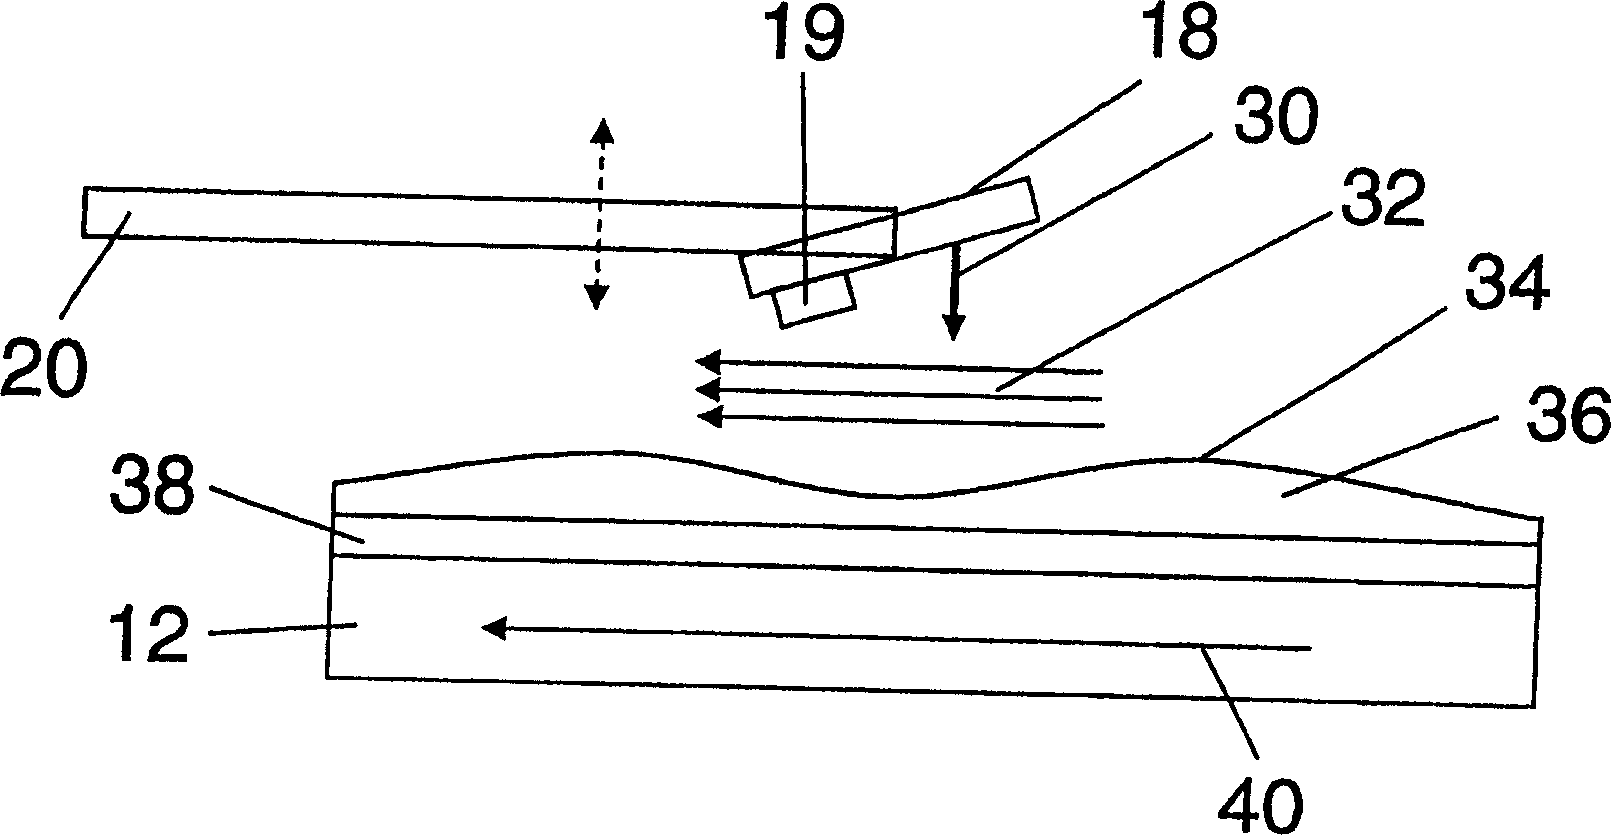 Disk drive having reduced variation of disk surface lubricant layer thickness